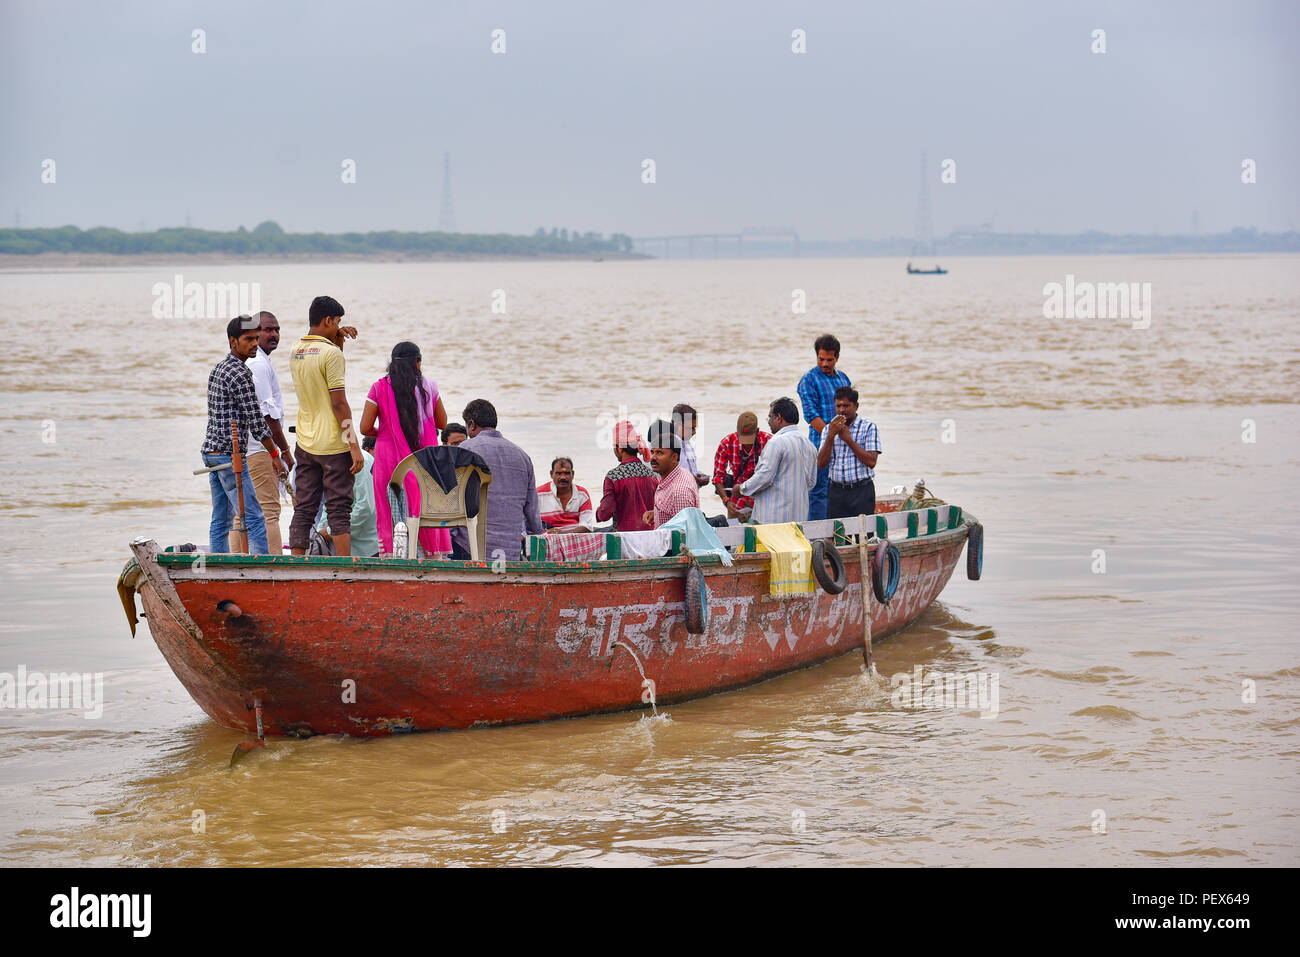 Indian people and tourists on boats for tour on Ganges river Stock Photo